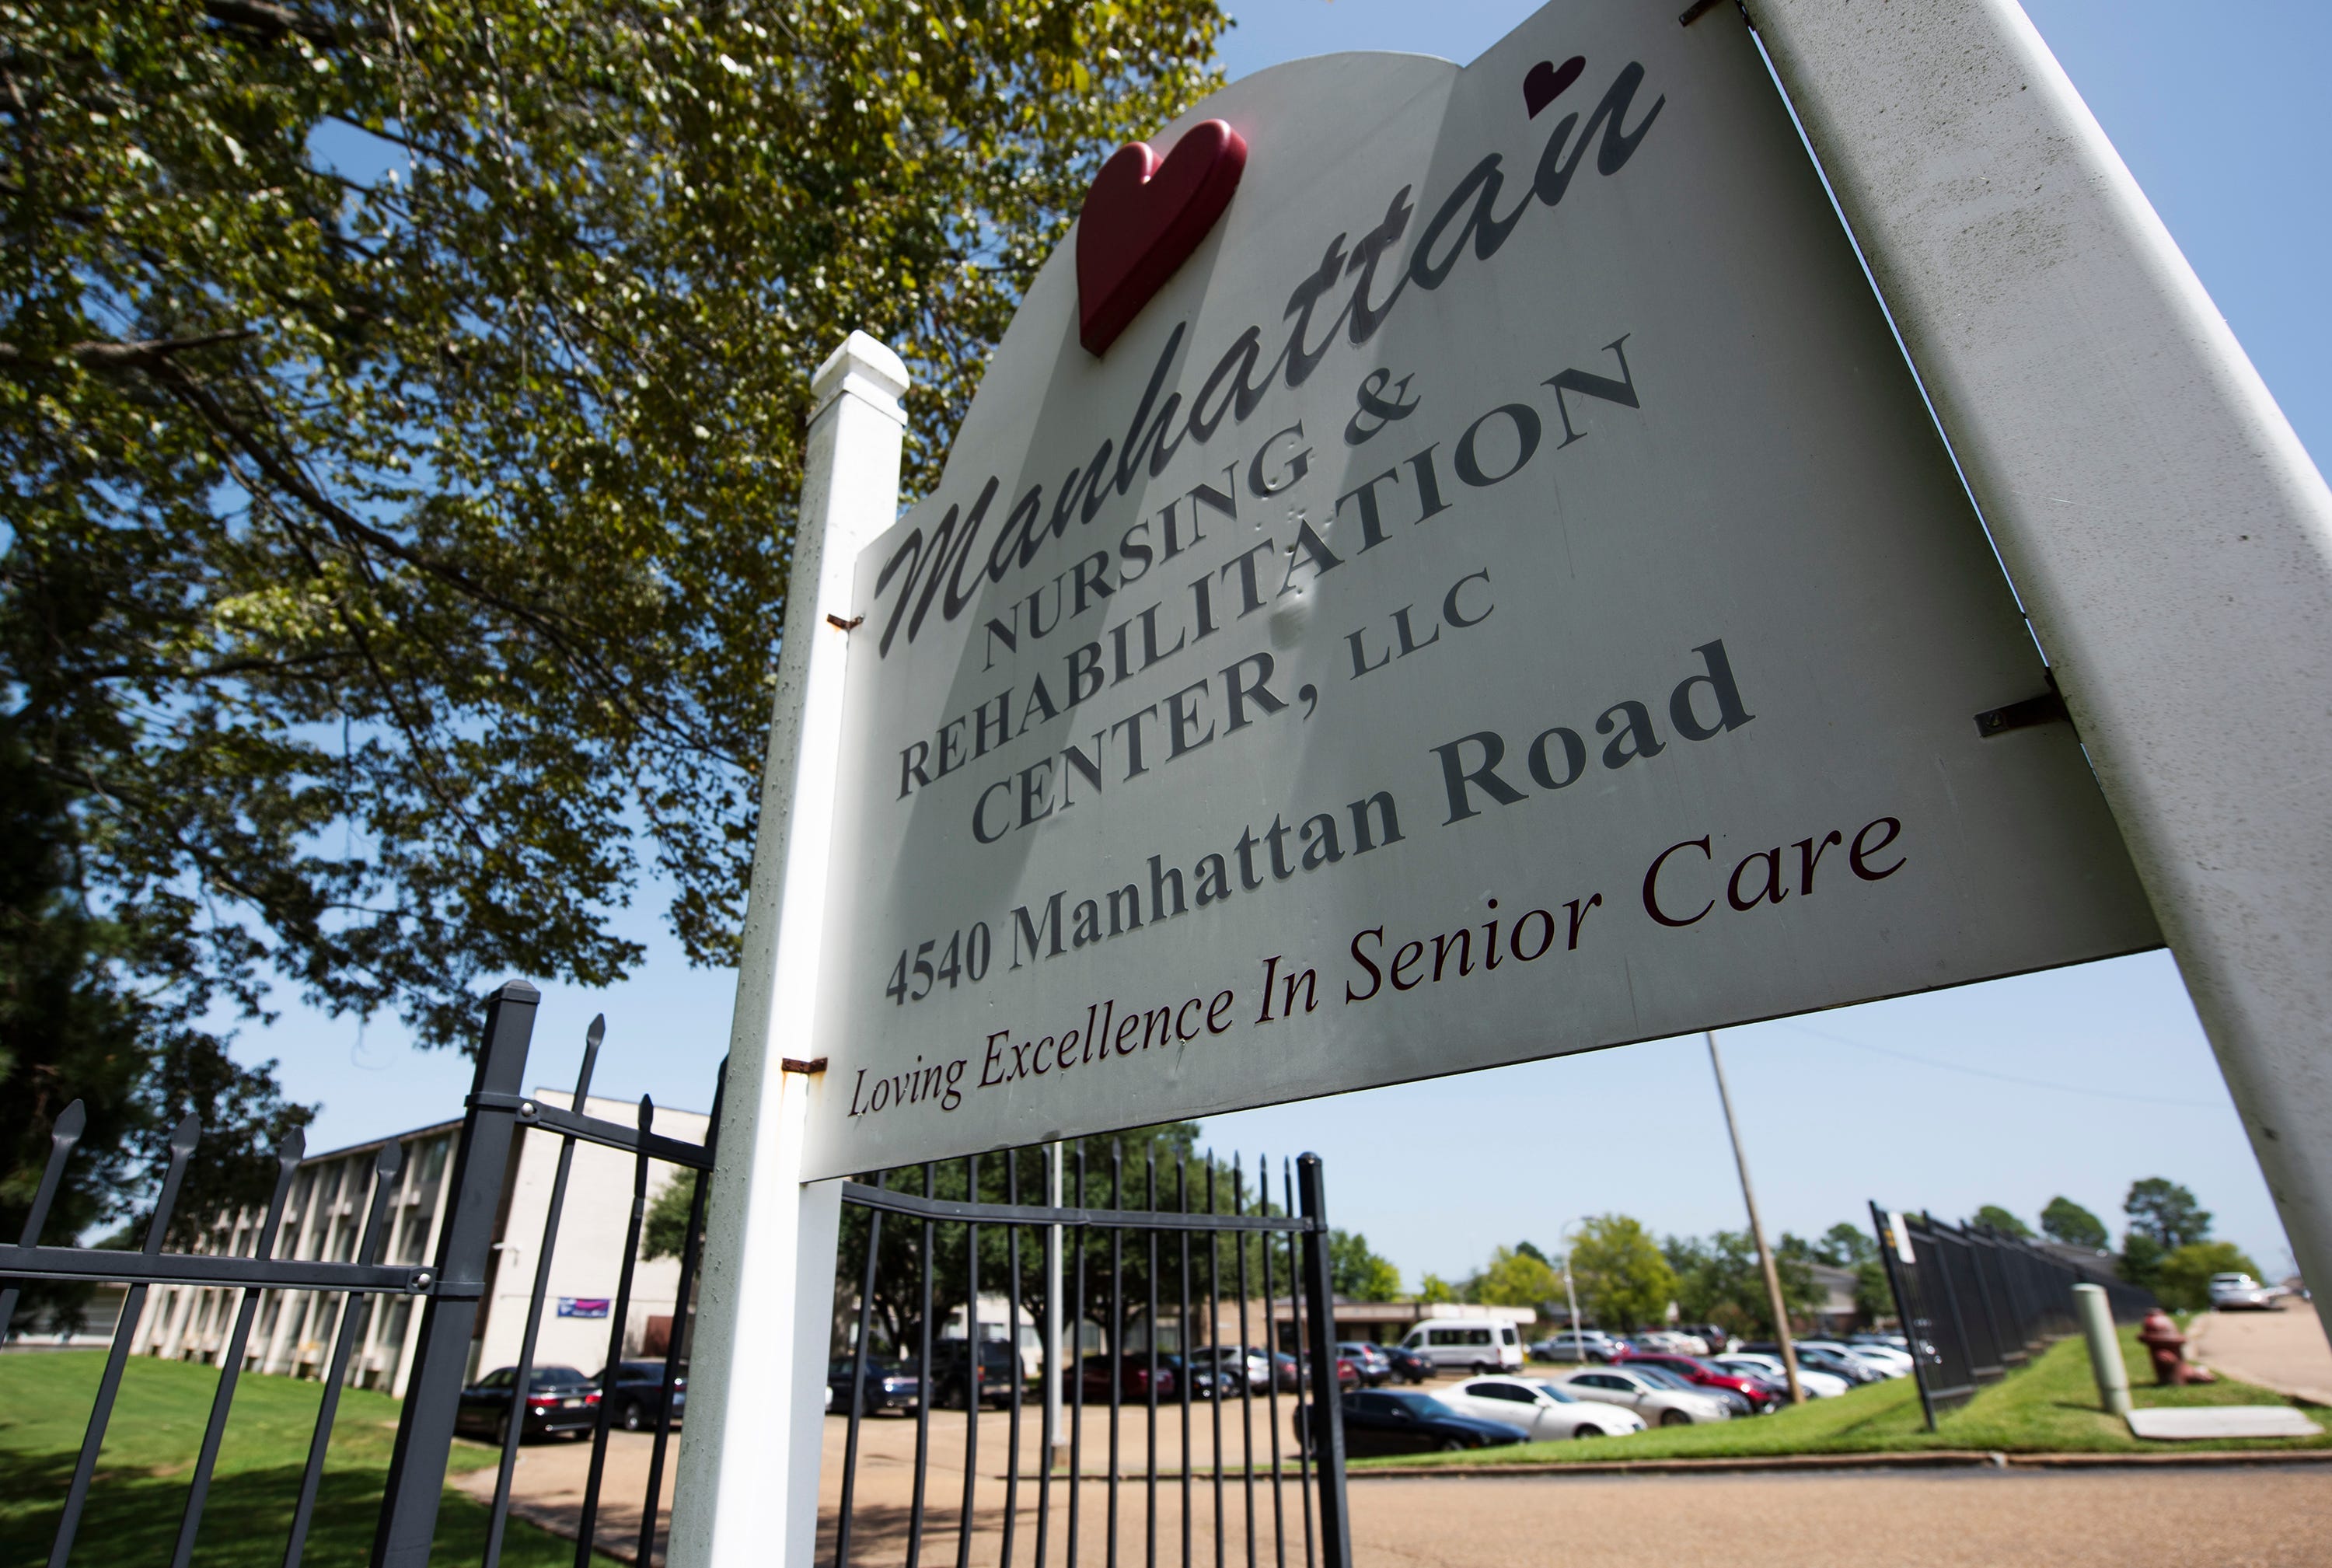 In September 2020, the Mississippi Department of Health said Manhattan Nursing Home in Jackson, Mississippi, had the highest number of cumulative COVID-19 deaths among residents in long-term care facilities in Hinds County.